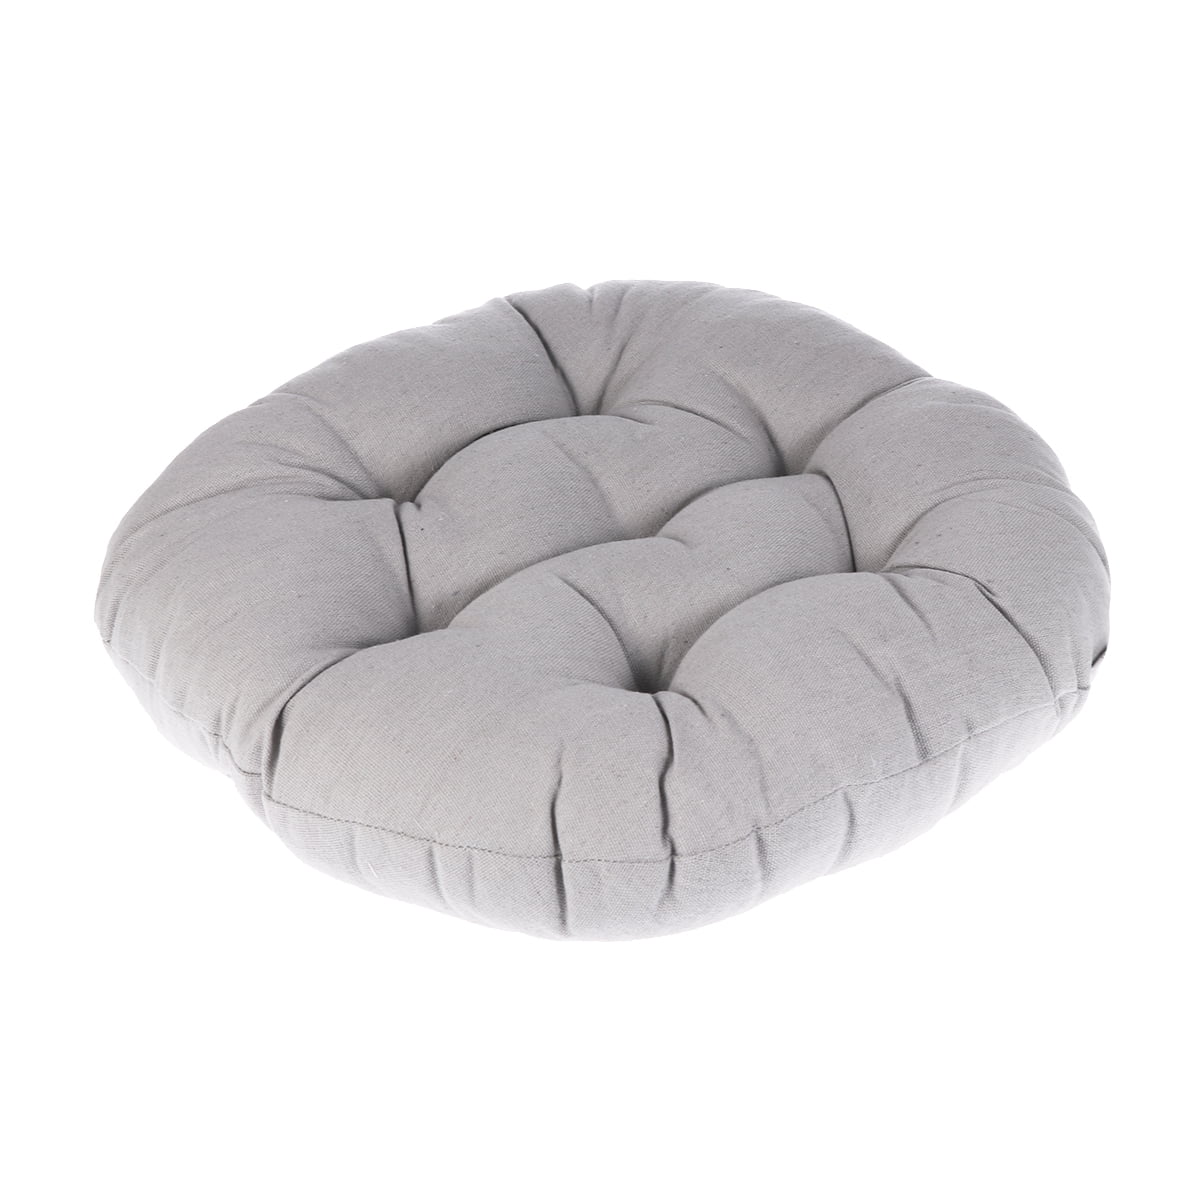 Home & Kitchen Solid Color Cotton Linen Round Seat Cushion Floor Pillow  Cushion Yoga Bolster Tatami Floor Round Cushion for Couch Chair Bed Car Floor  Seat Pillows Cushions Dark Gray L Bedding